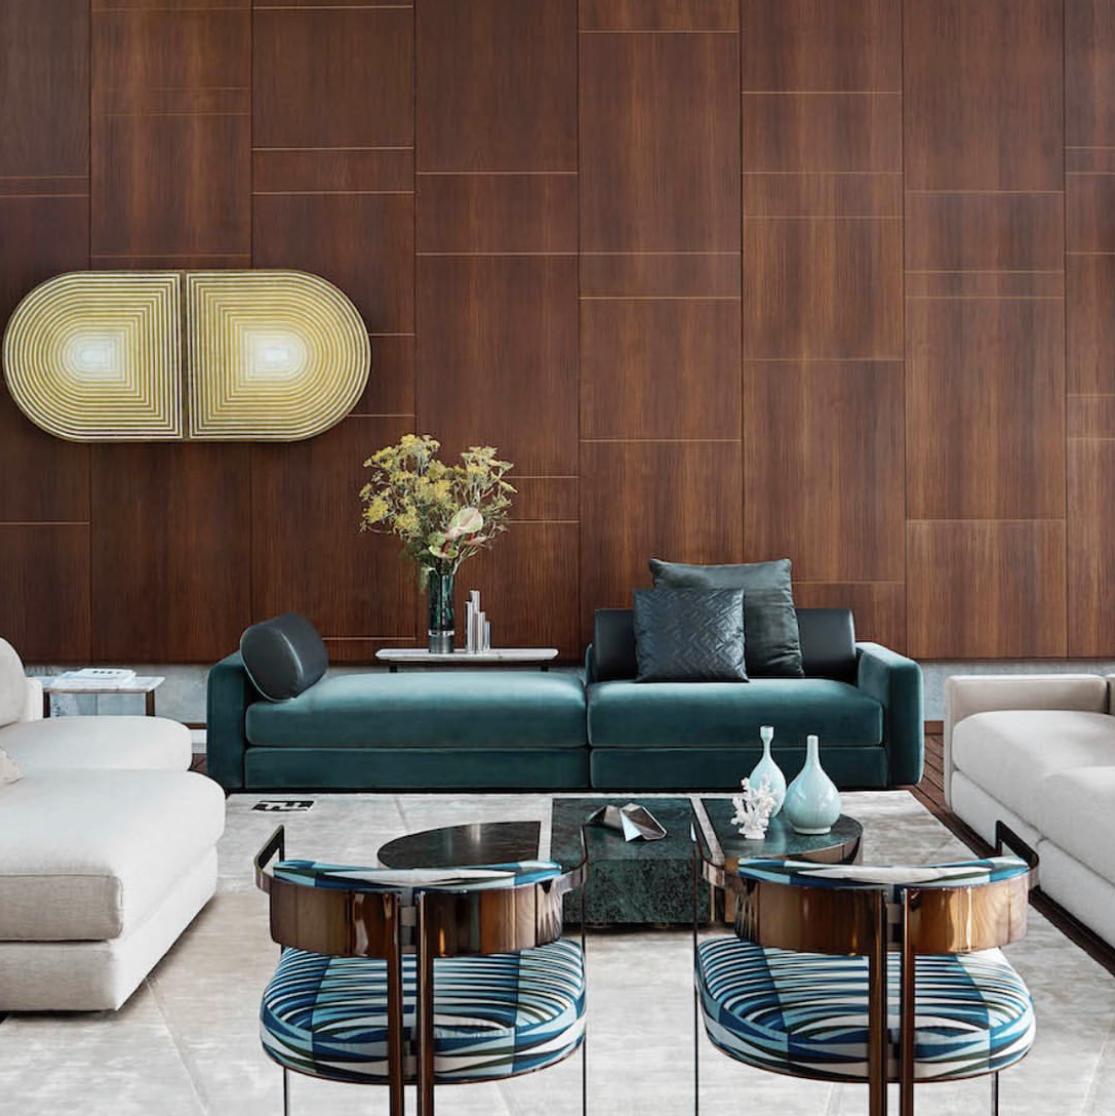 We love this interior...the rich beiges and hues of turquoise contrasted by deep wooden textures by Fendi Casa.... definitely one of our favorites!! 😍
@Fendi @priviofficial 

#fendicasa #fendi #priviofficial #privi #luxury #luxurylifestyle #luxurydesign #luxuryliving #interior